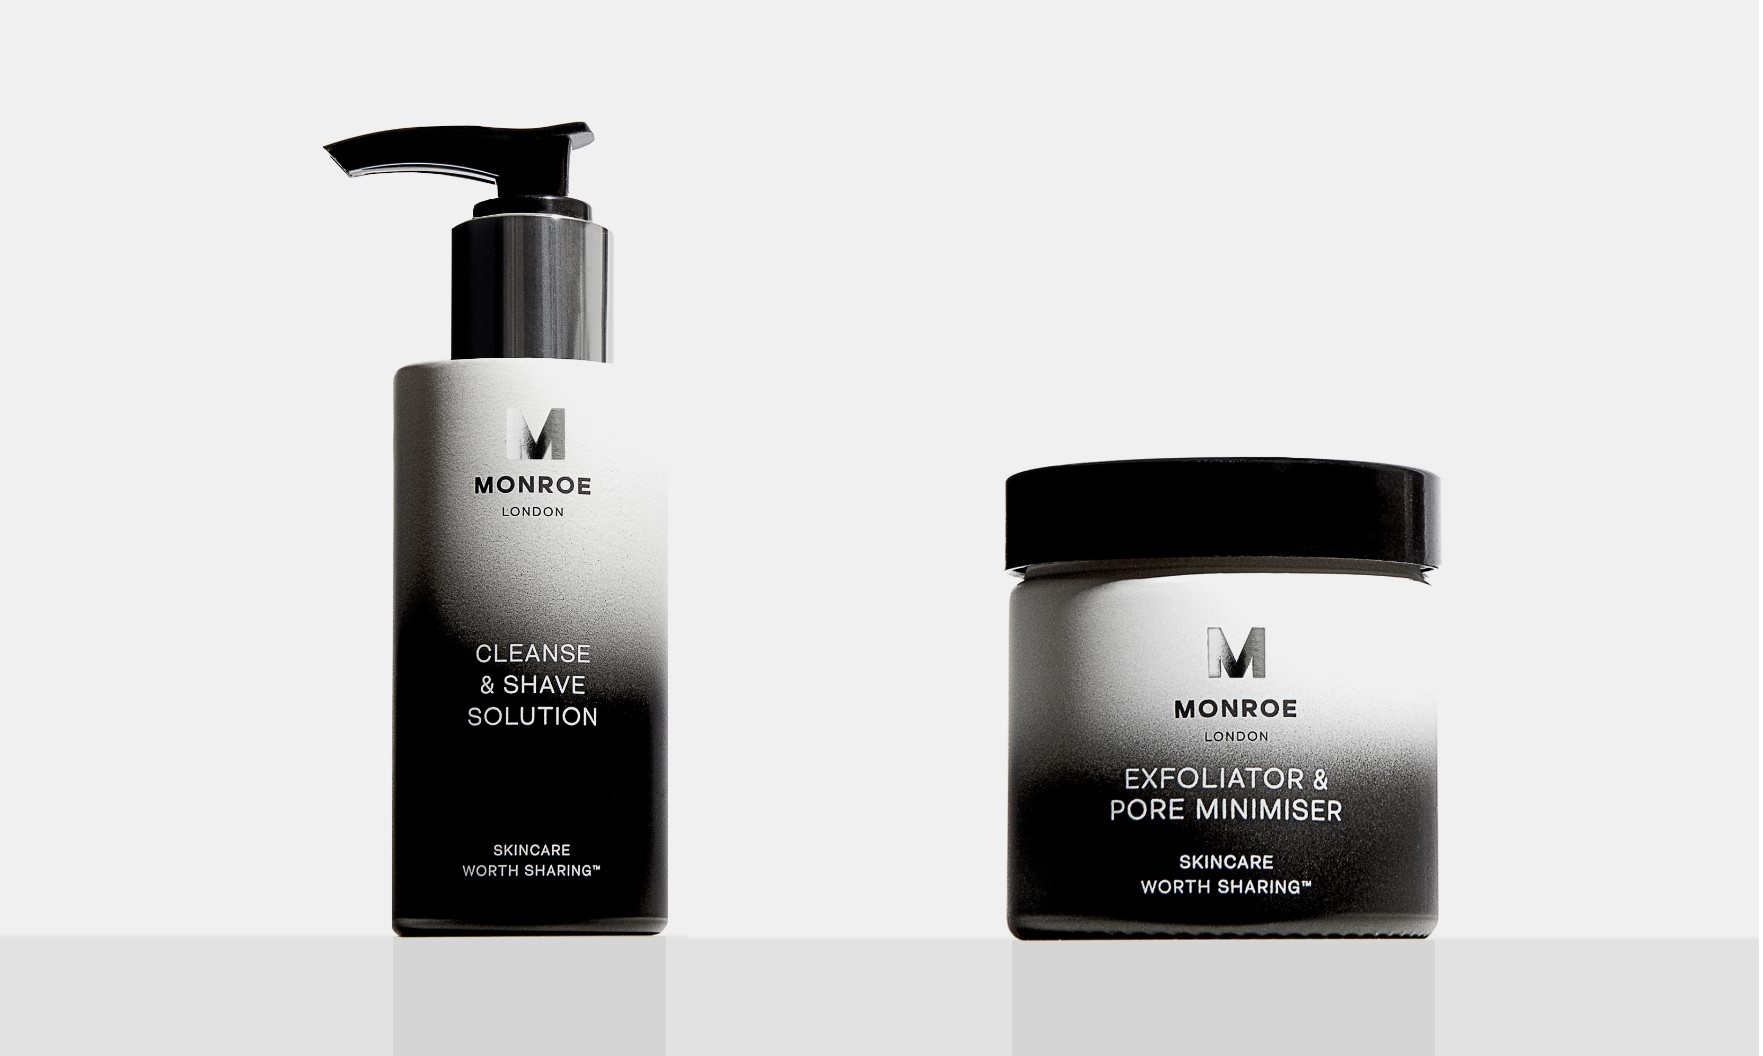 Monroe Skincare launch 2020 by Tiger Savage and Will King targets ...